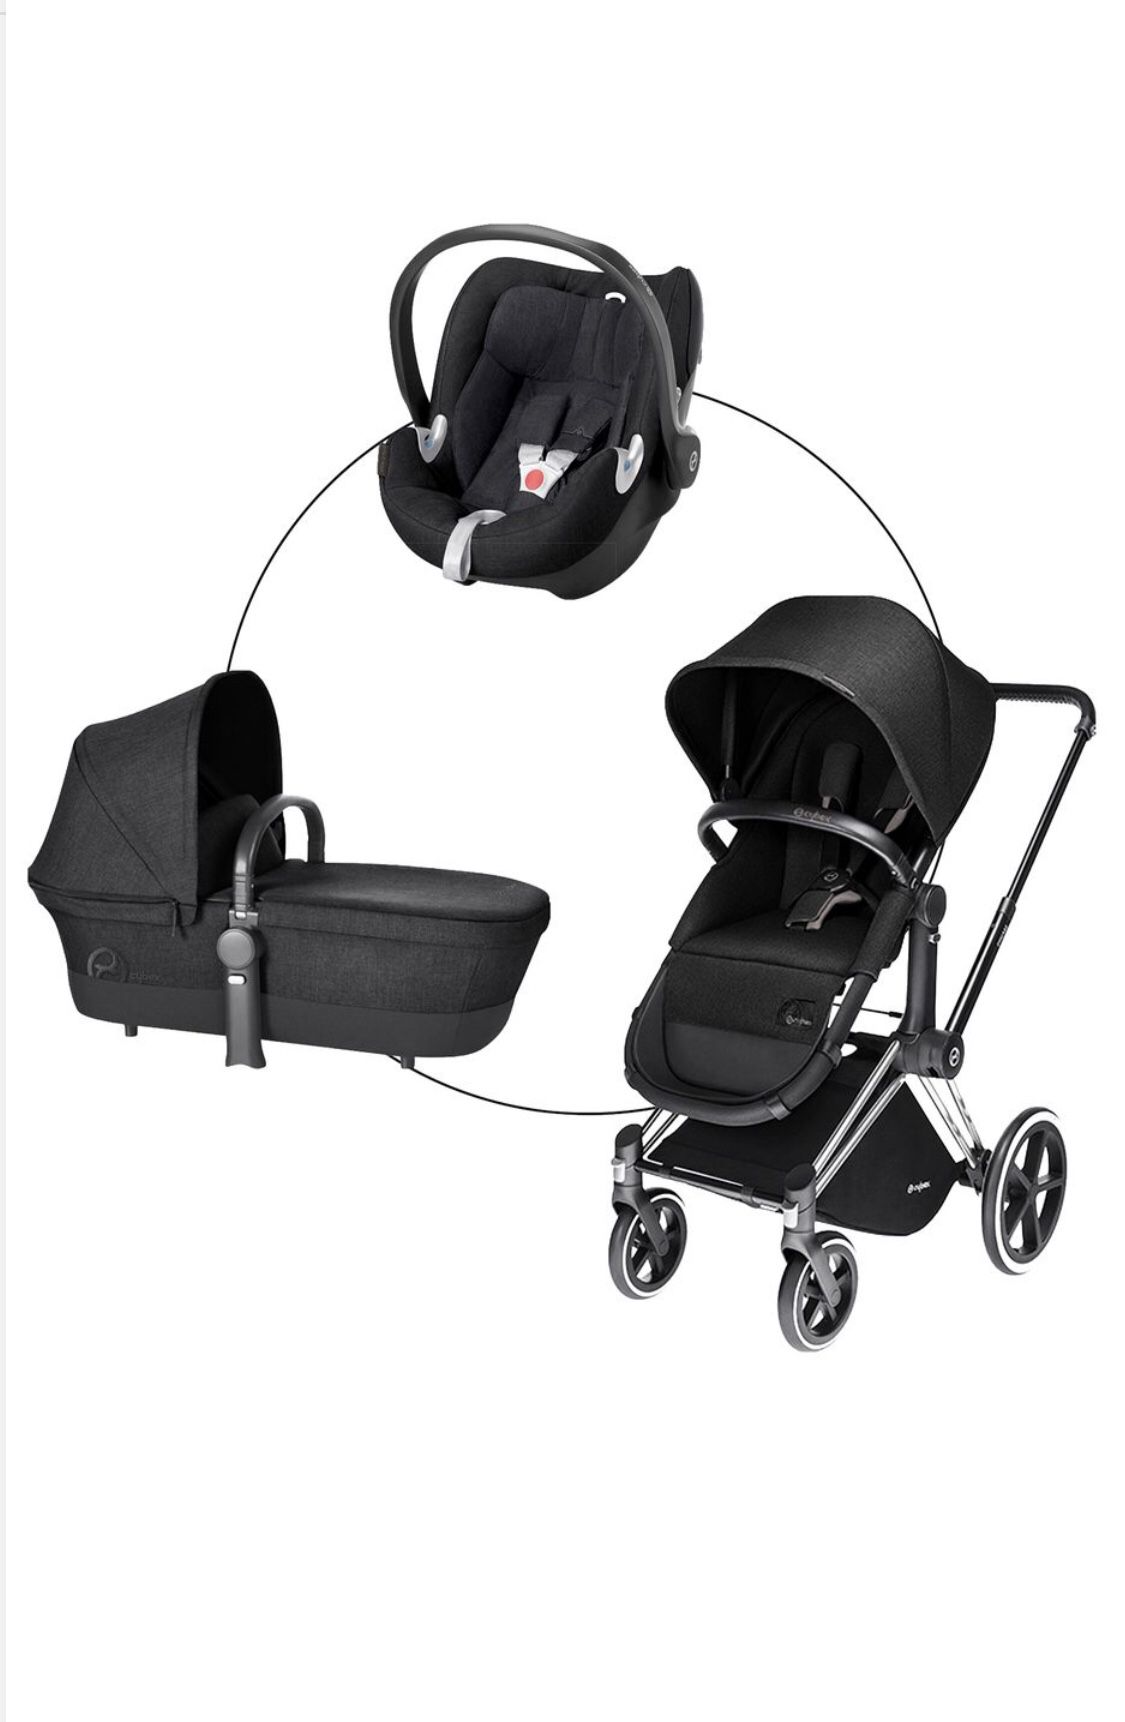 Cybex Priam 2-in-1 Light Seat Stroller and Cybex Cloud Q Plus Infant Car Seat